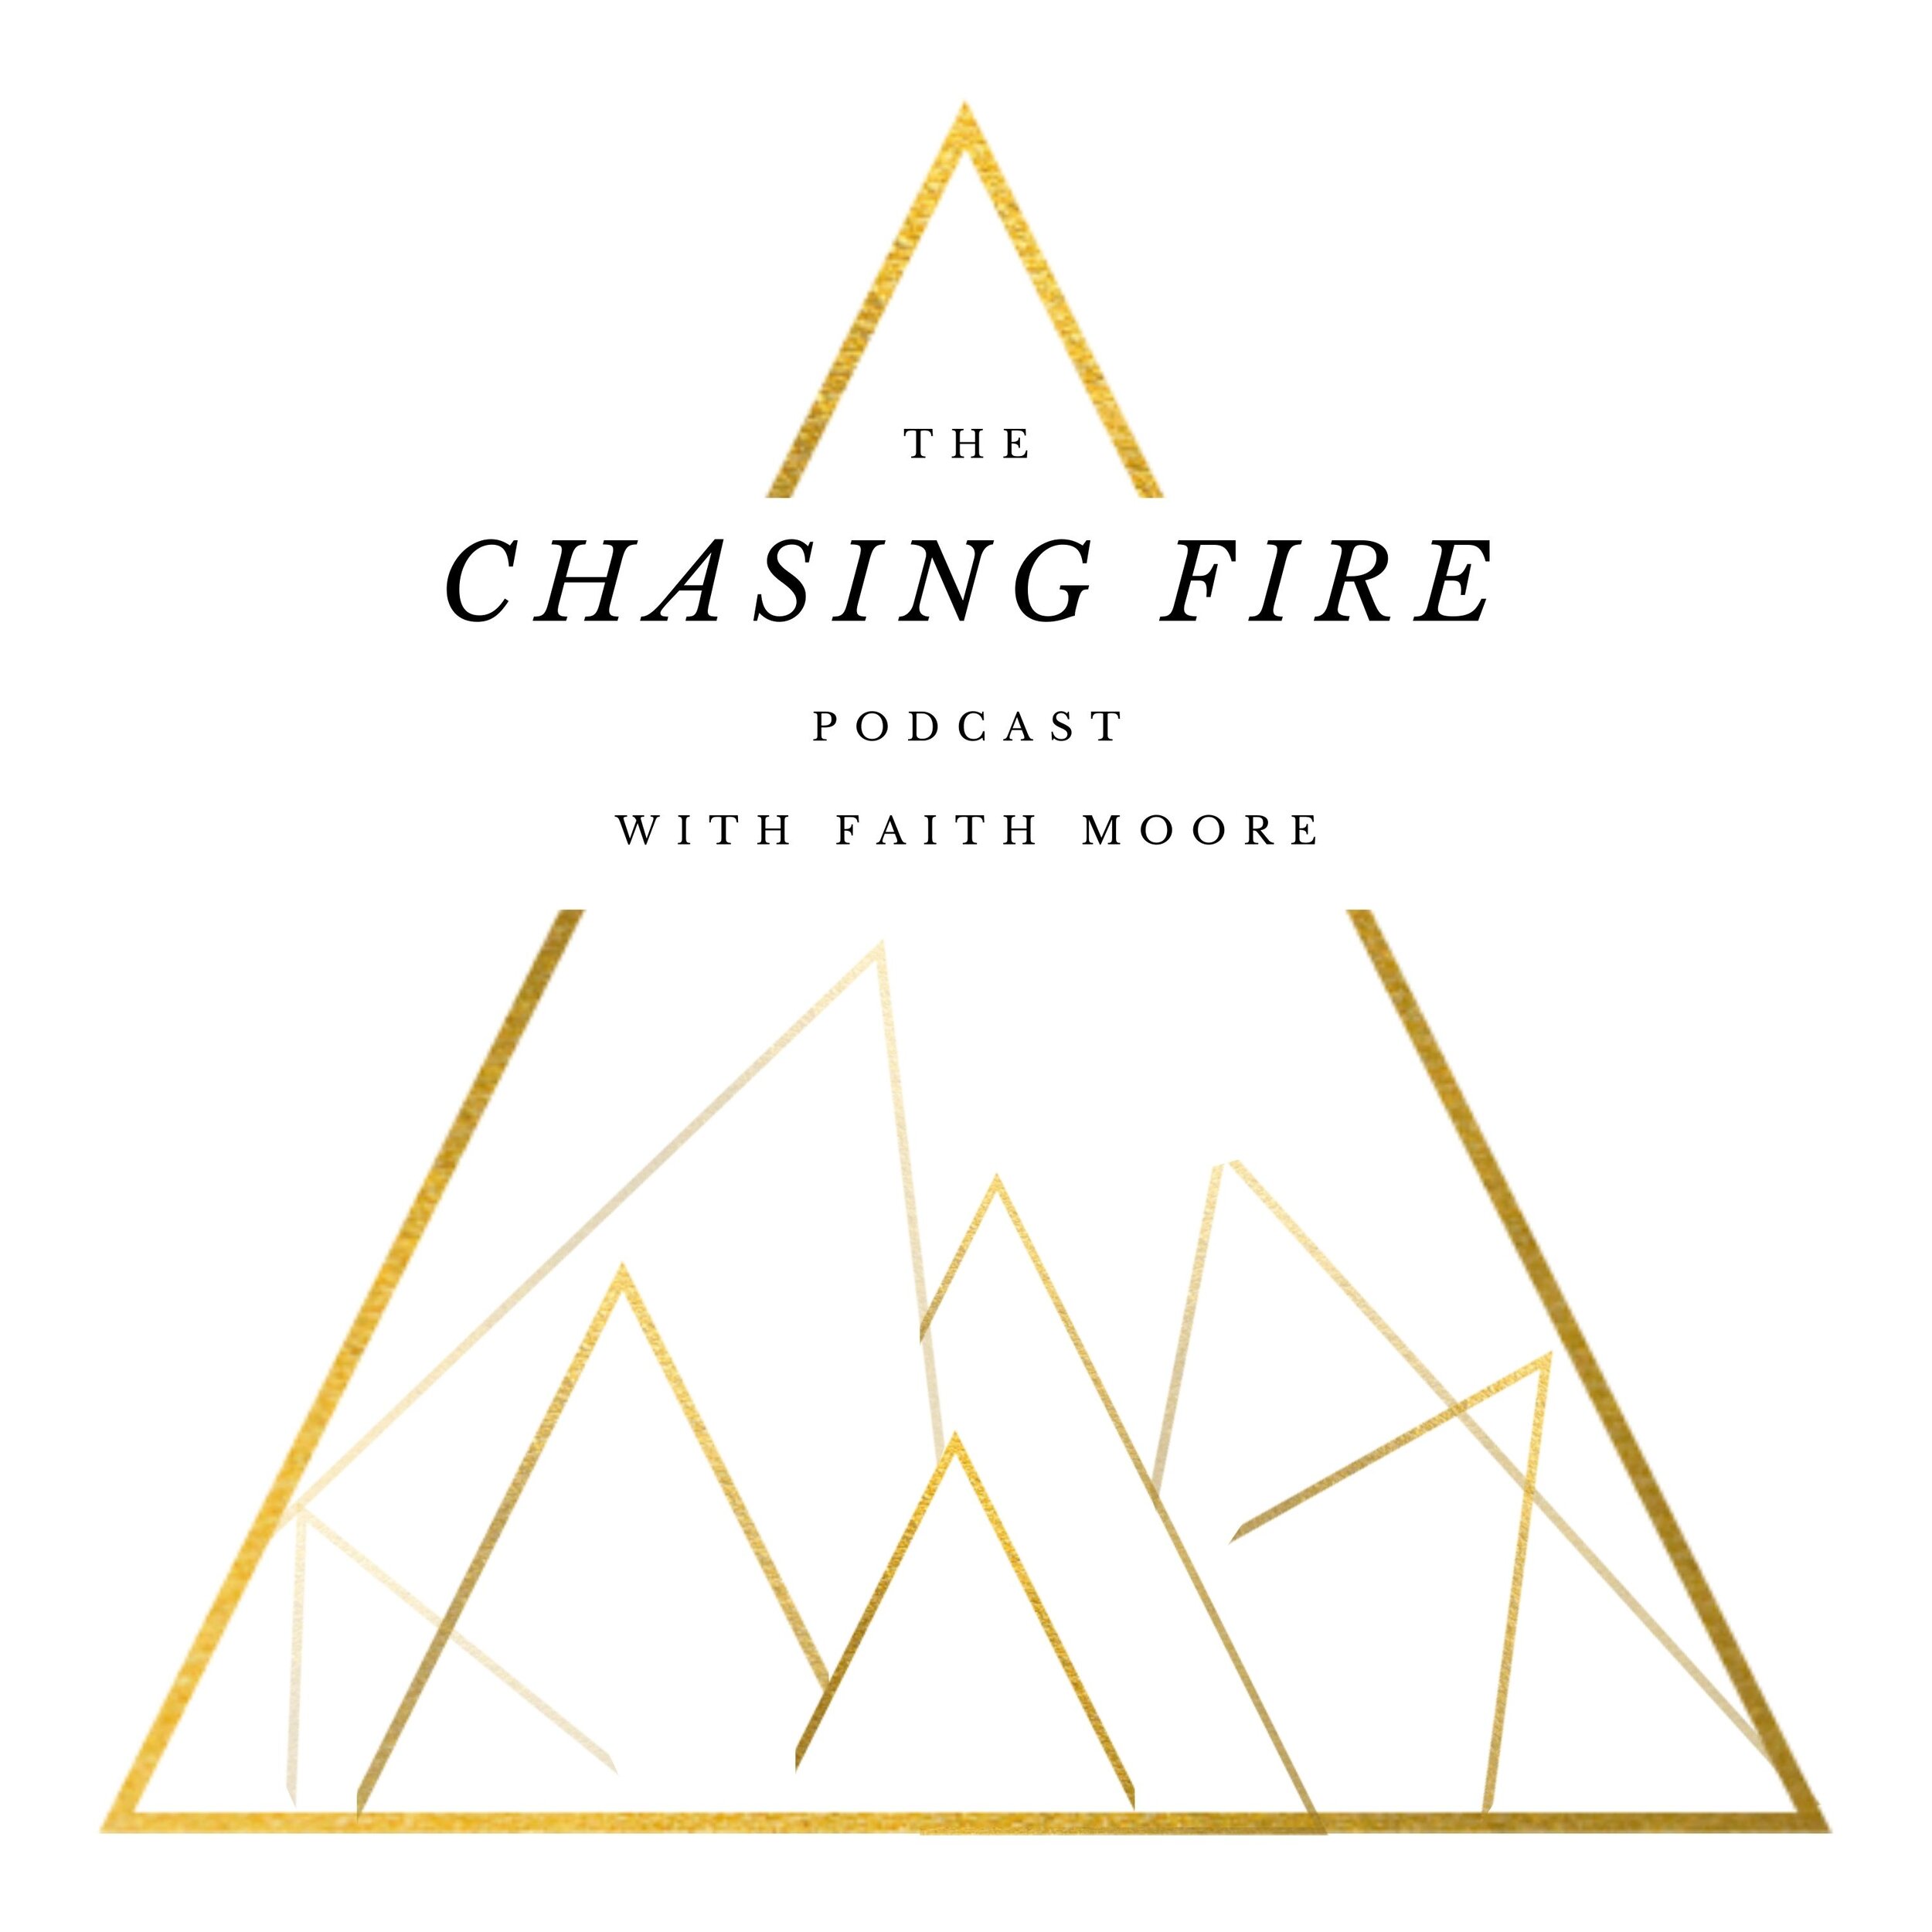 Faith Moore &amp; The Chasing Fire Podcast